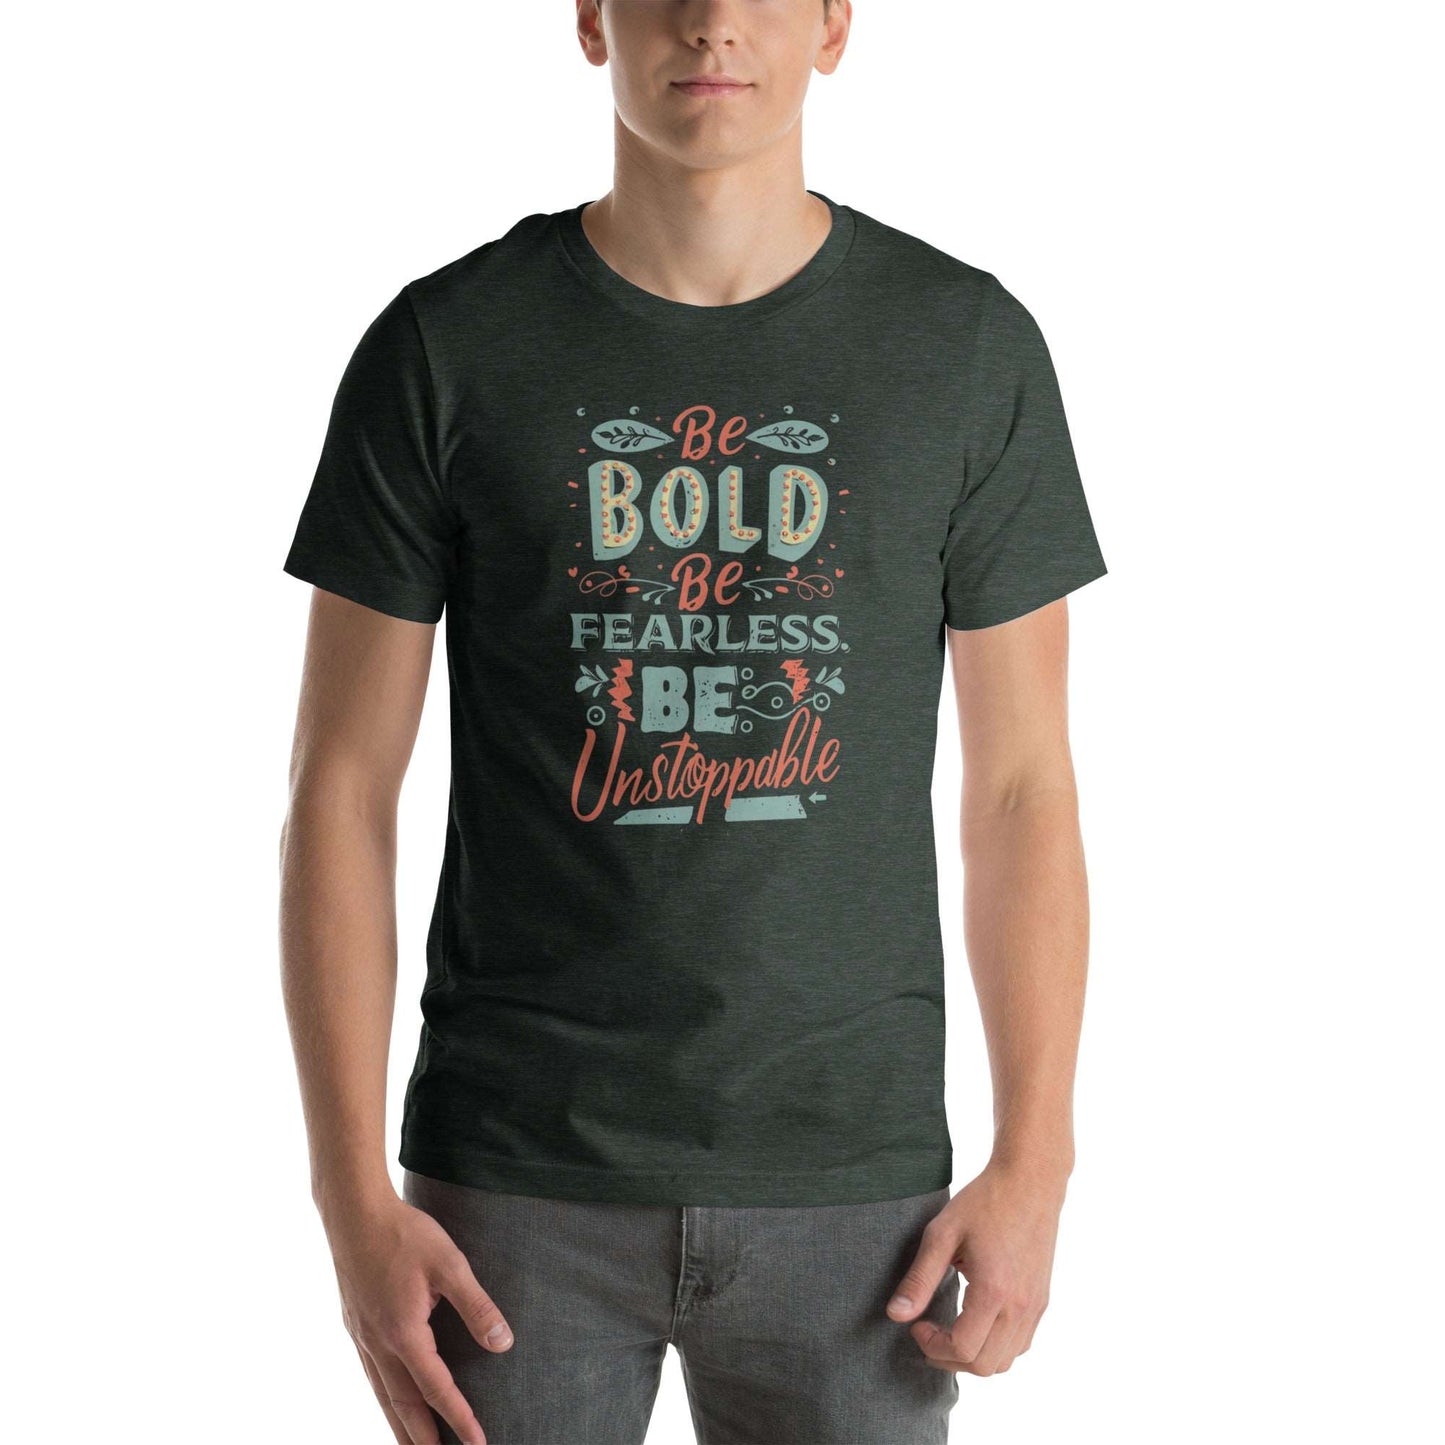 BE BOLD BE FEARLESS BE UNSTOPPABLE - Unisex t-shirt